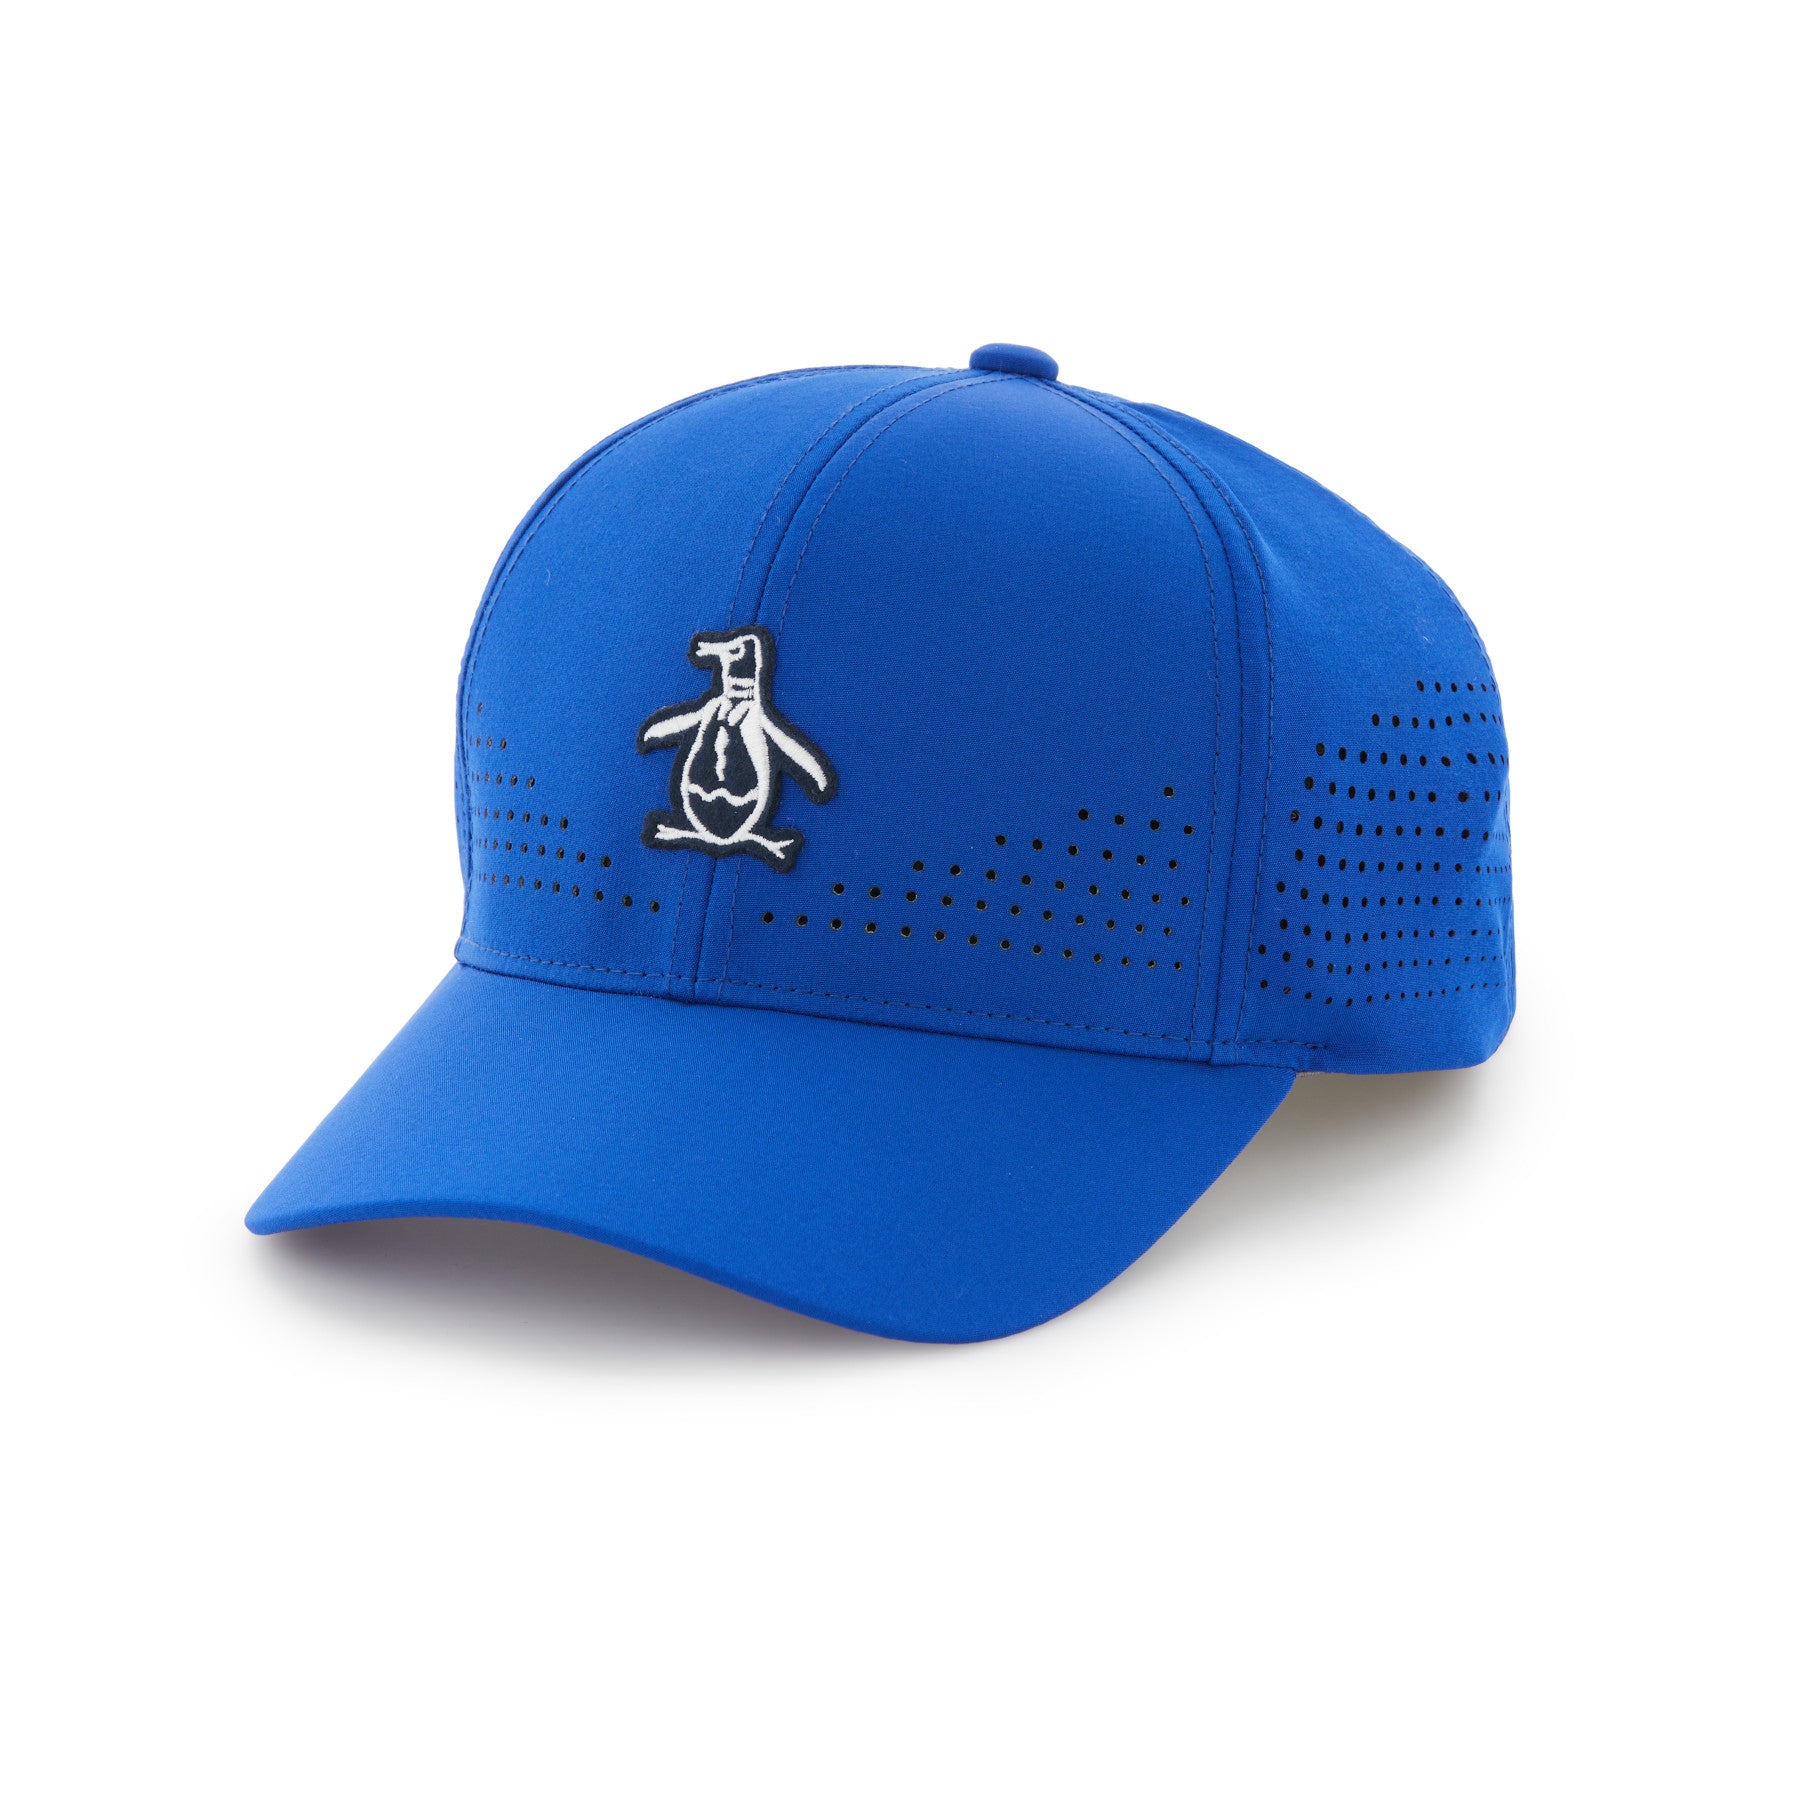 View Country Club Sports Cap In Bluing information